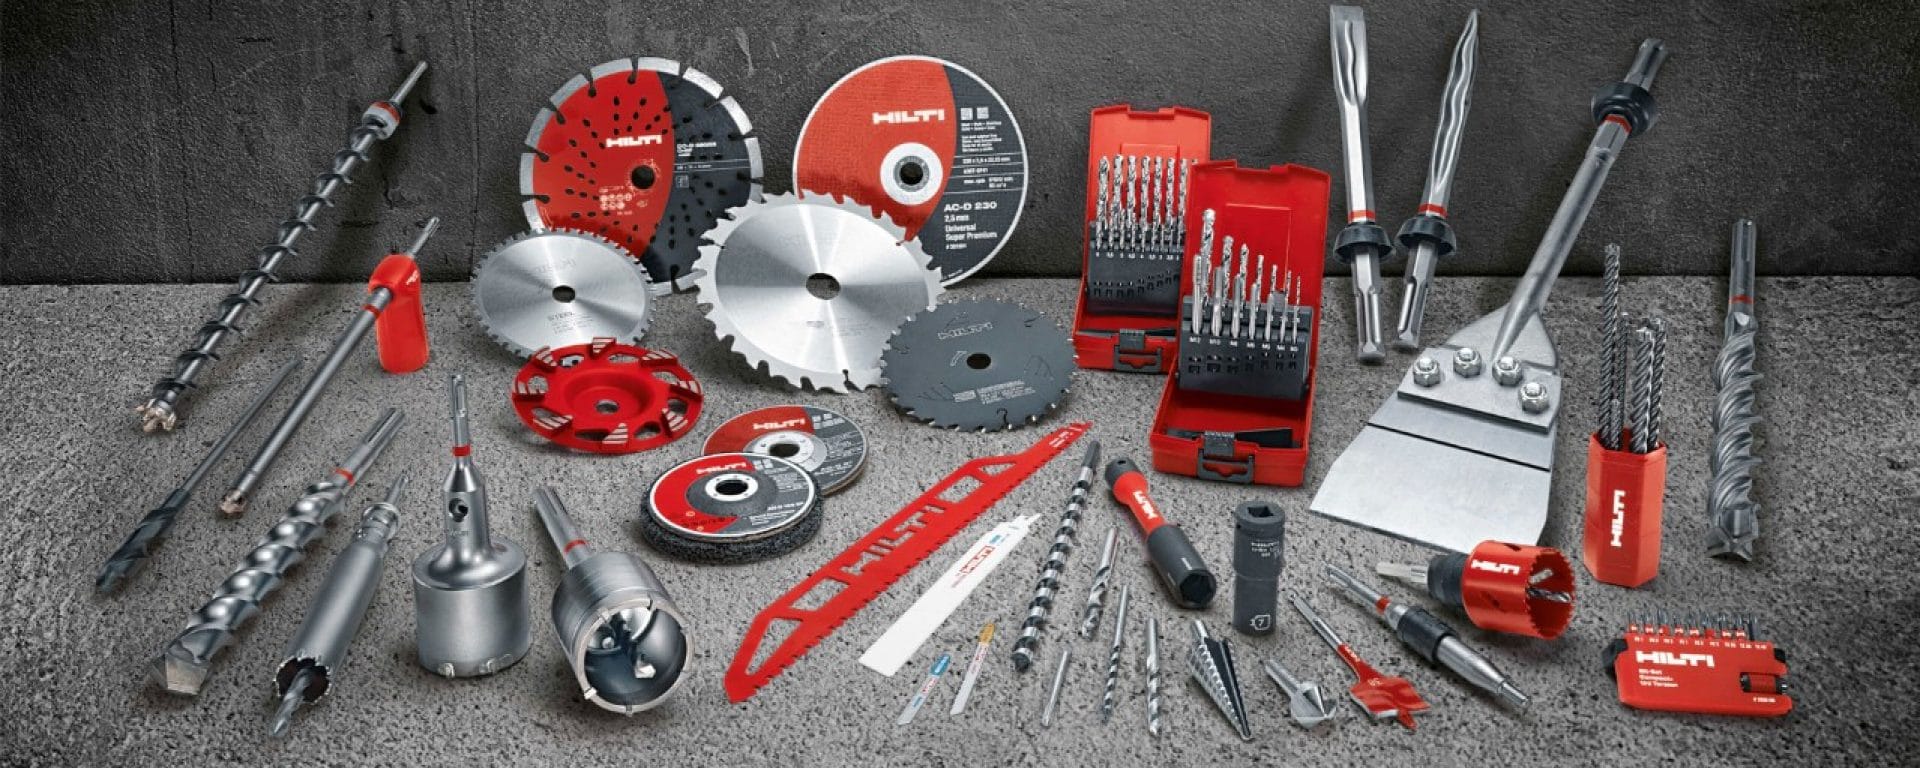 hilti inserts and consumable image